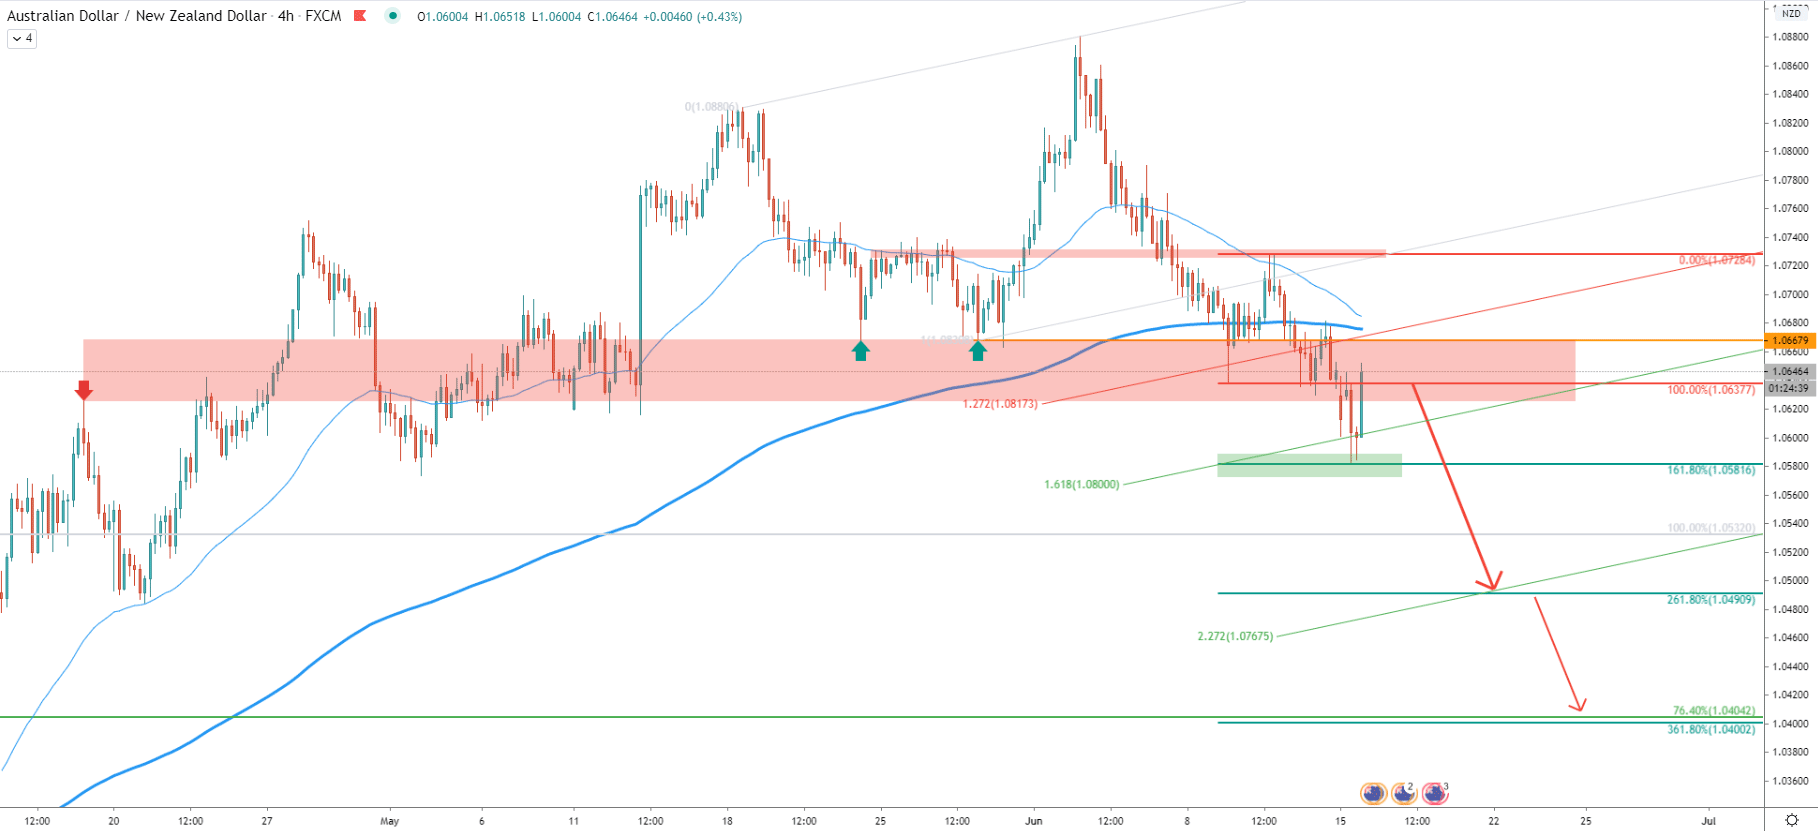 AUD/NZD 4-Hour Technical Analysis 15 June 2020